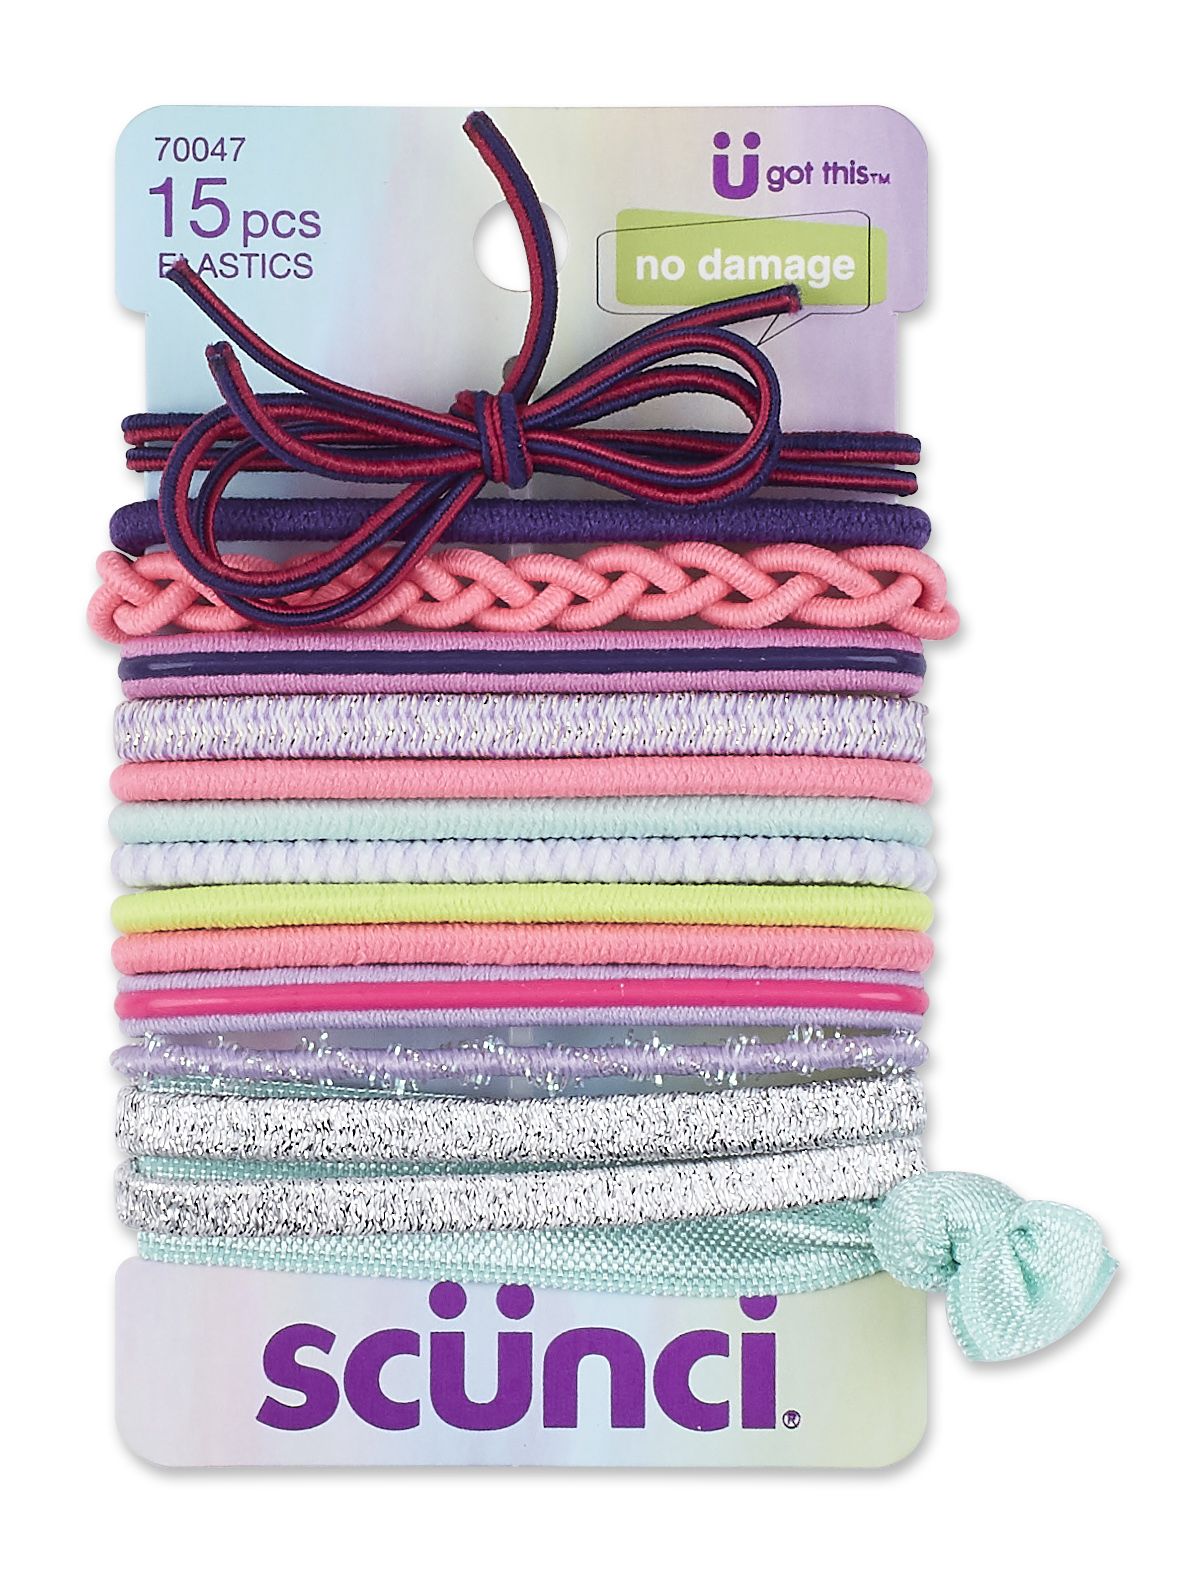 Scunci No-Damage Elastic Stretch Hairbands in Assorted Textures, Styles, and Bright & Neutral Colors